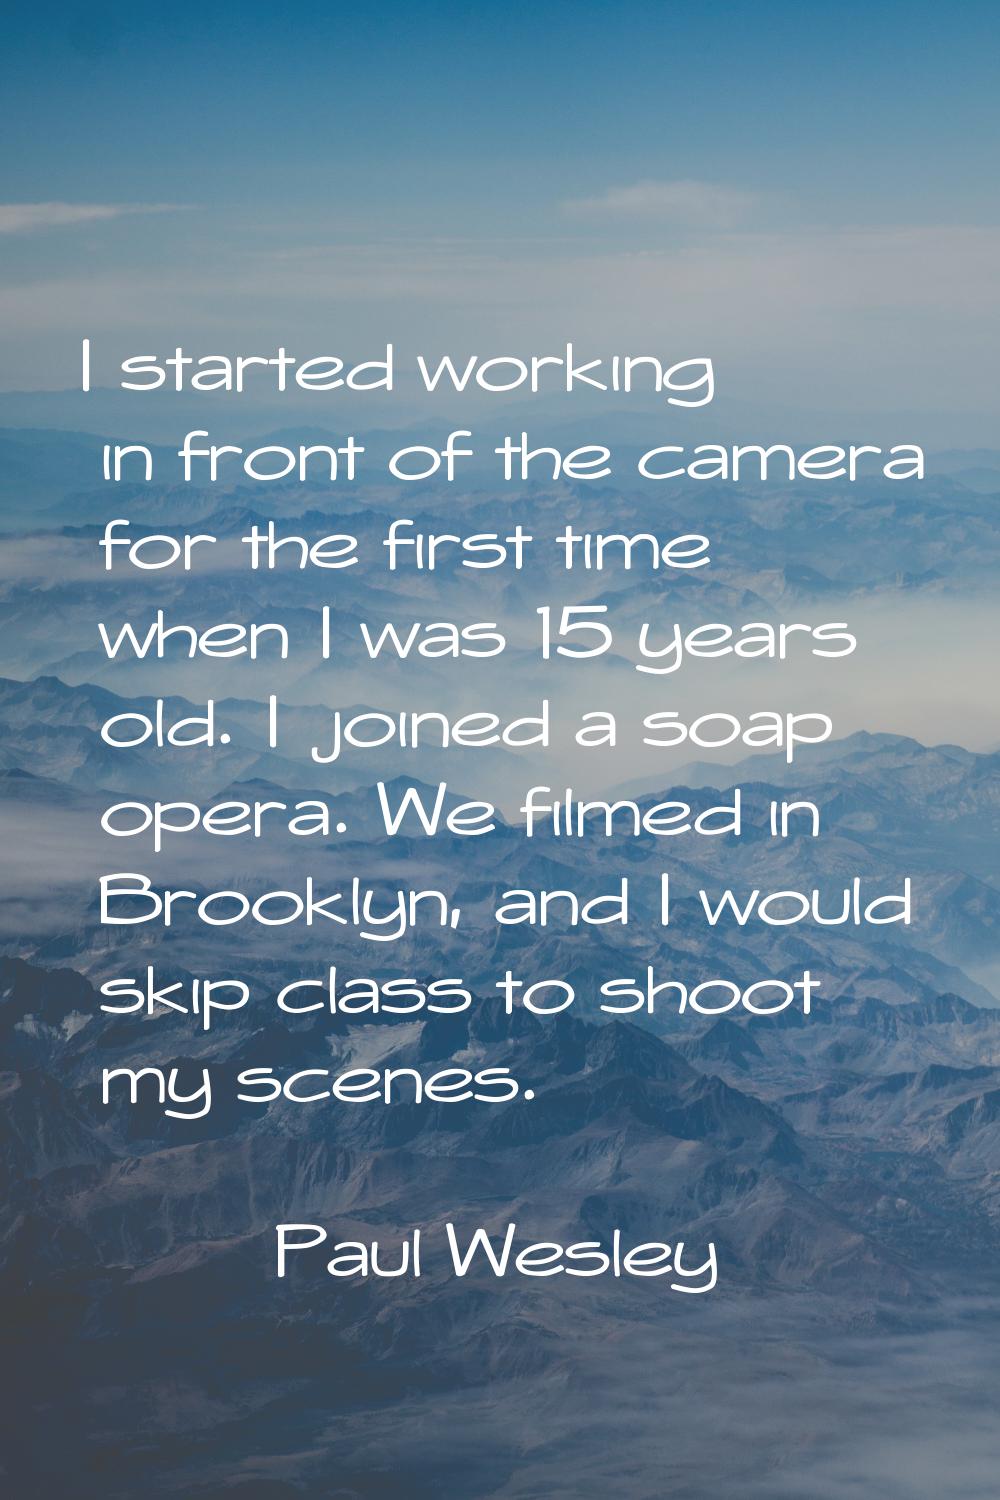 I started working in front of the camera for the first time when I was 15 years old. I joined a soa